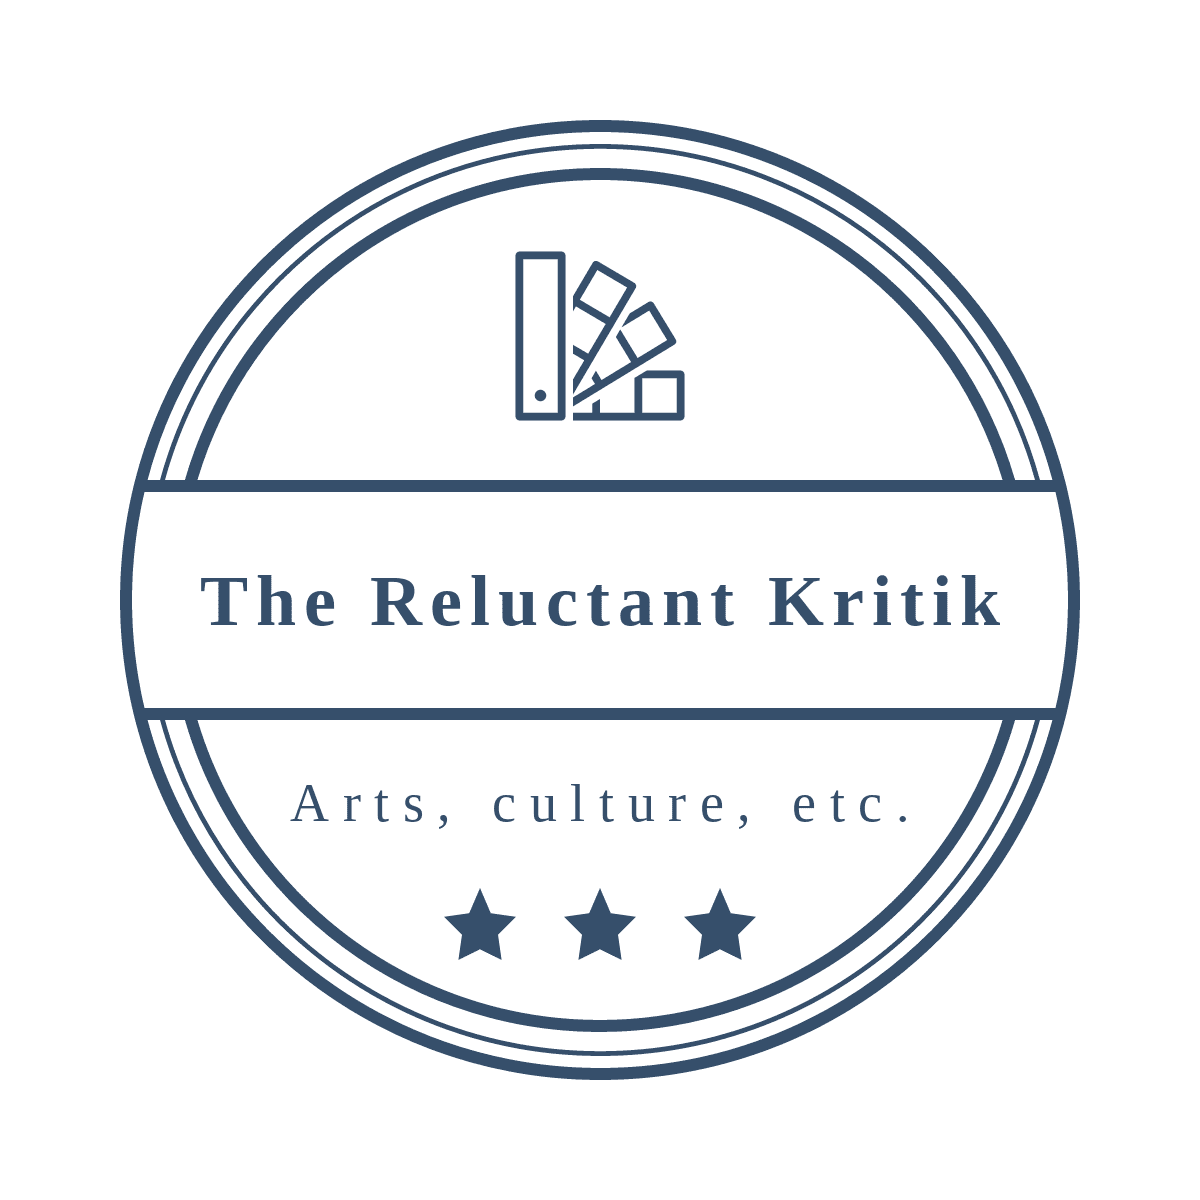 The Reluctant Kritik